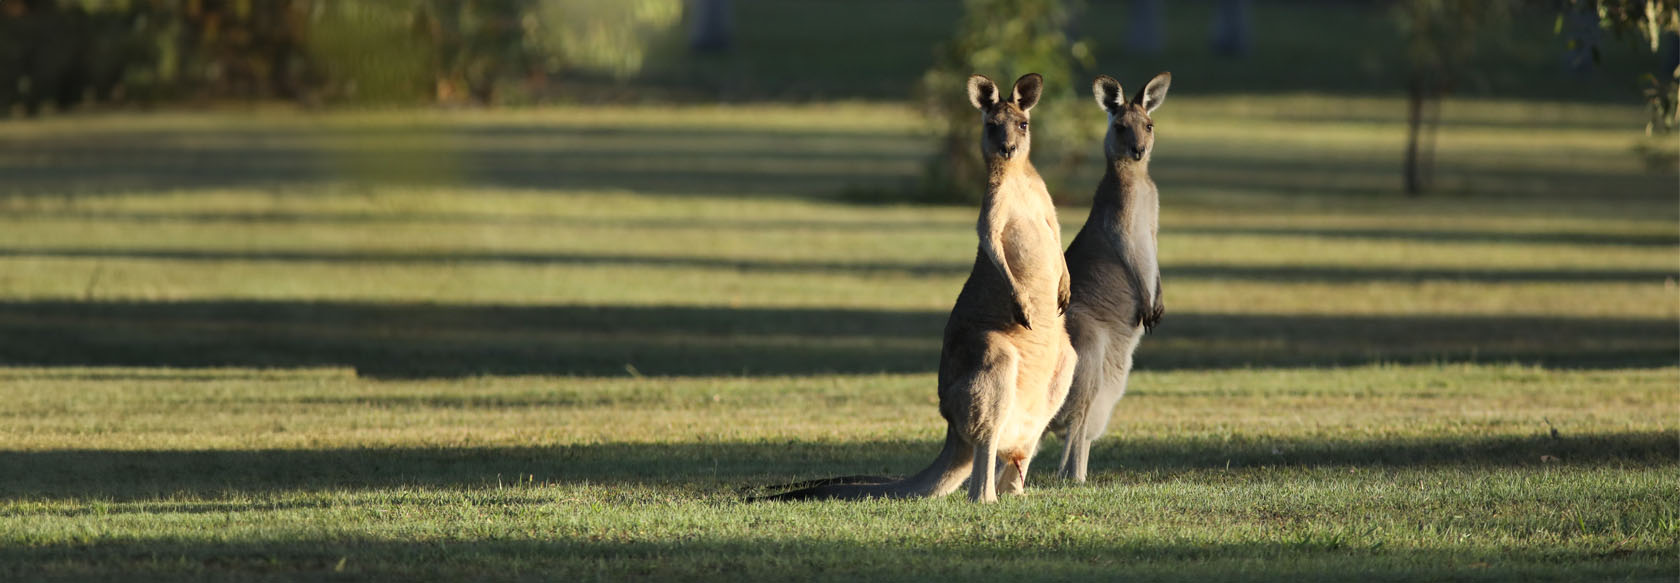 Two kangaroos stand to attention on a grassy field.